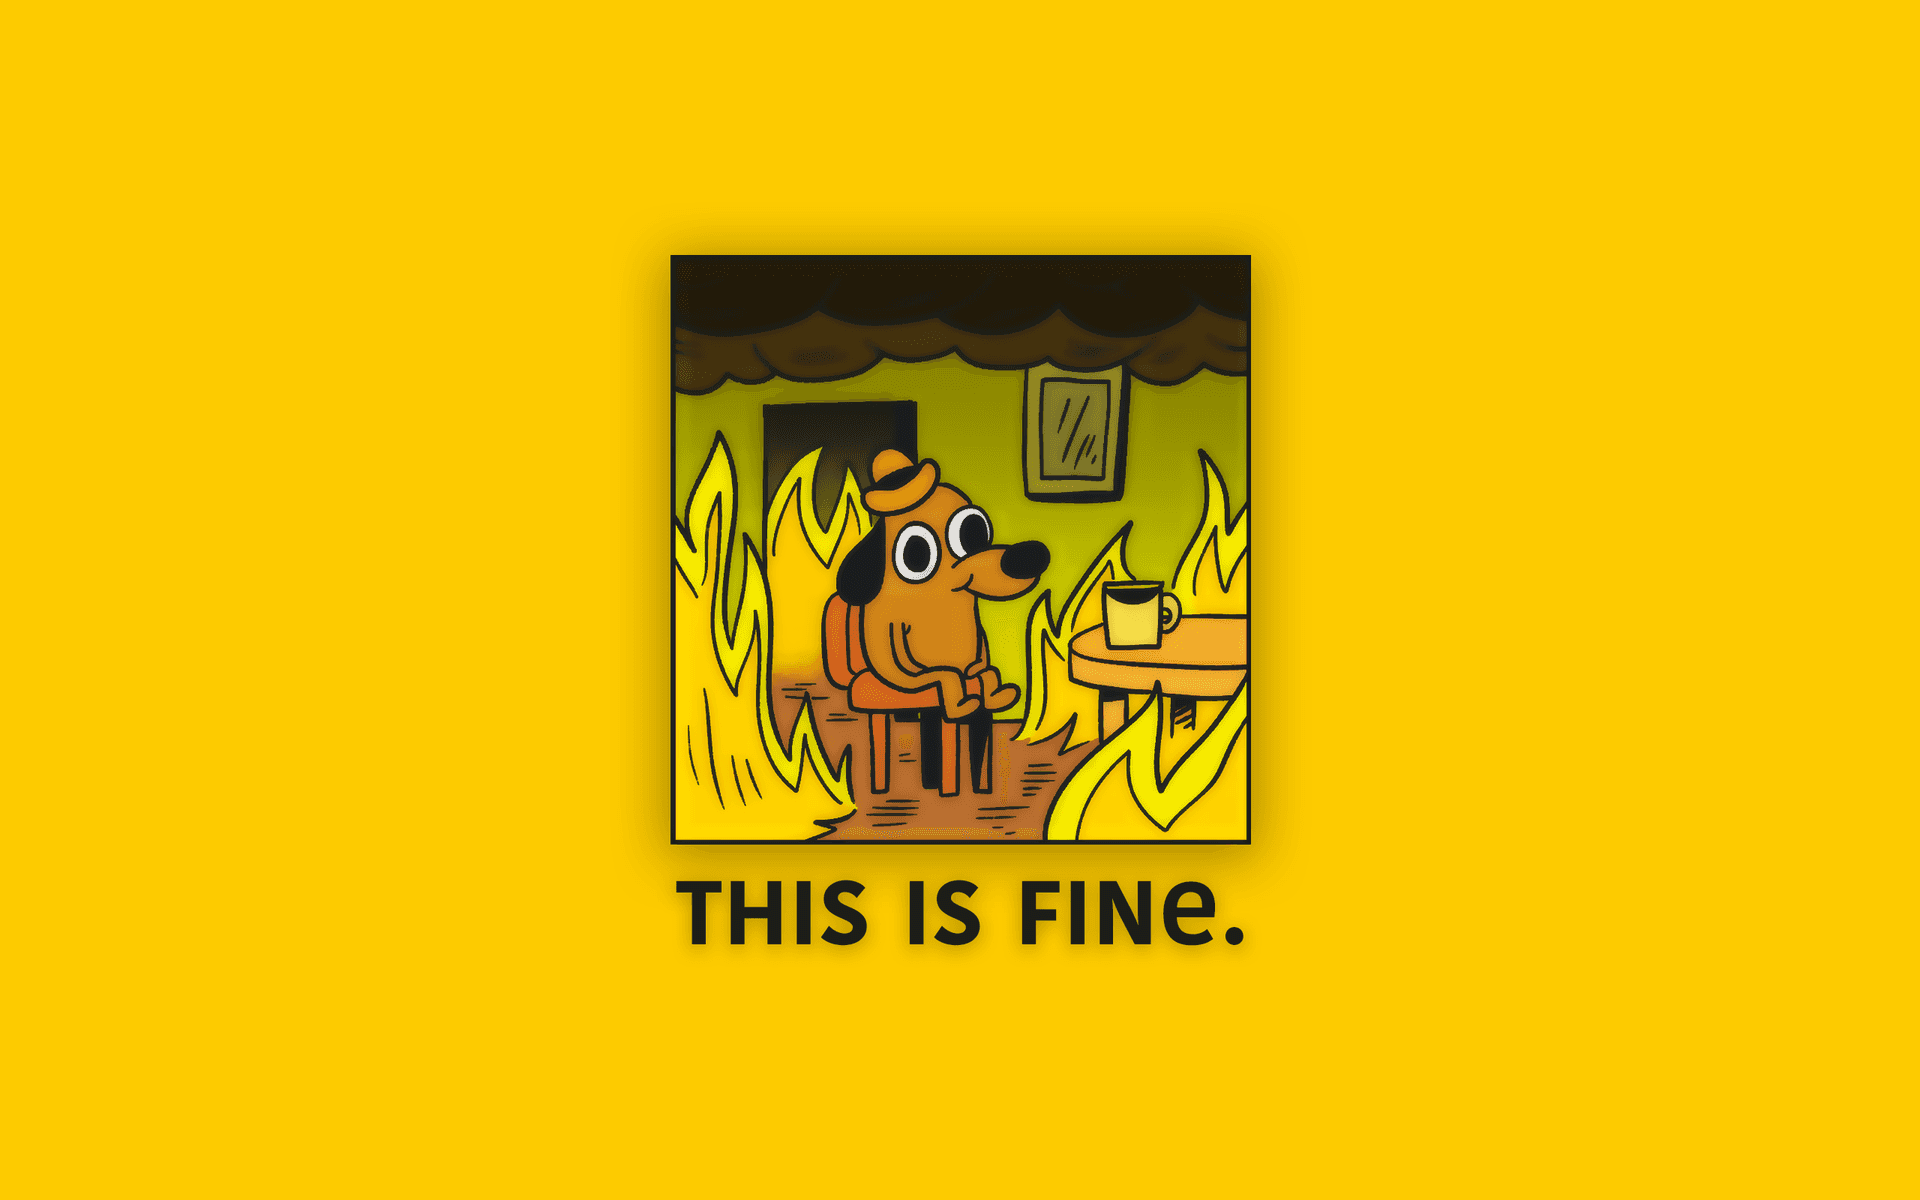 This Is Fine creator explains the timelessness of his meme - The Verge